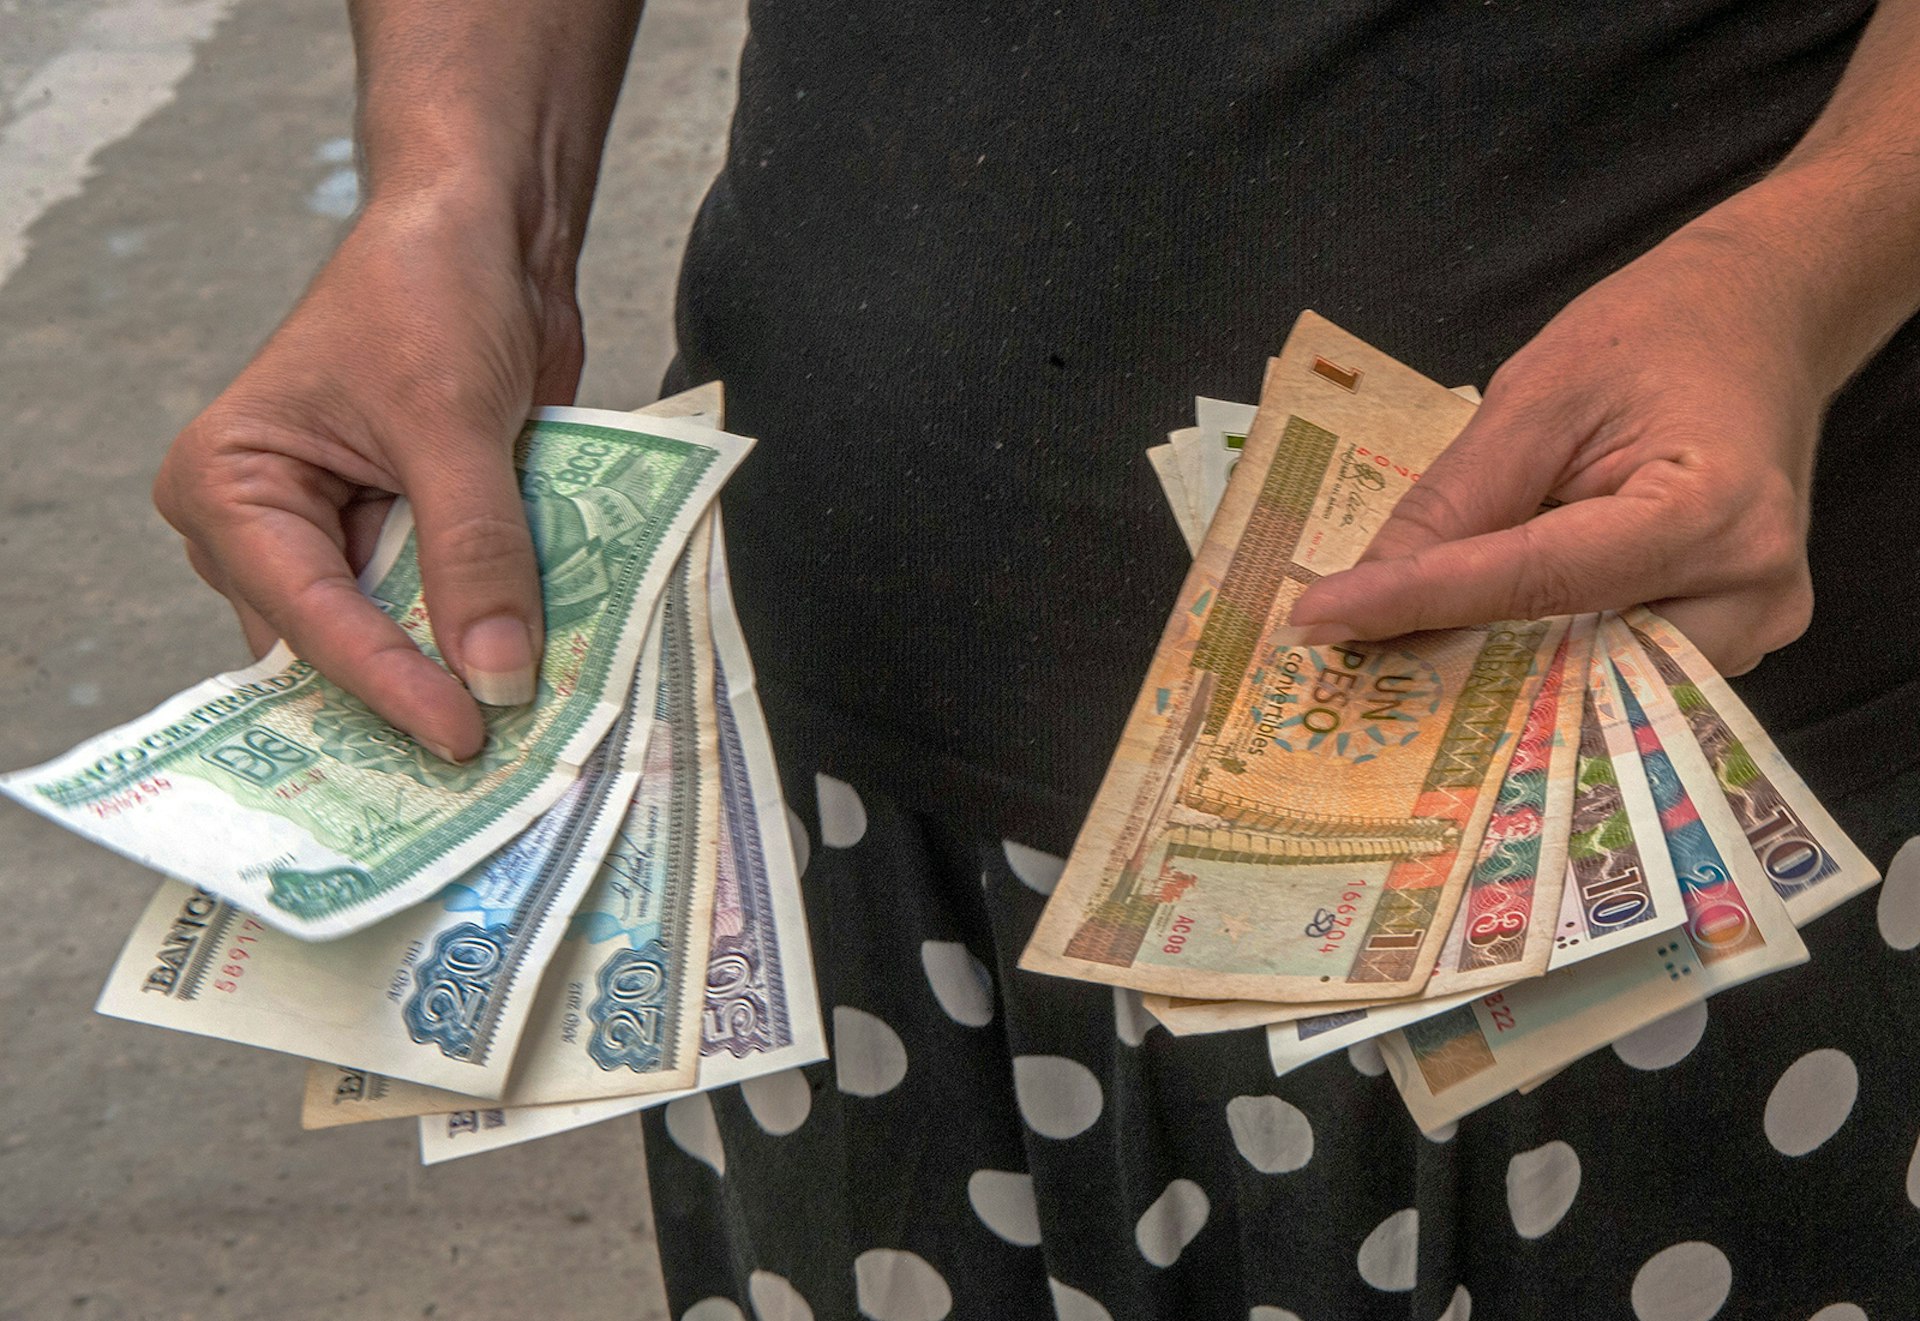 A Cuban shows Cuban Pesos CUP (Left hand) and Convertible Pesos CUC (Right hand), © Yamil Lage / Getty Images